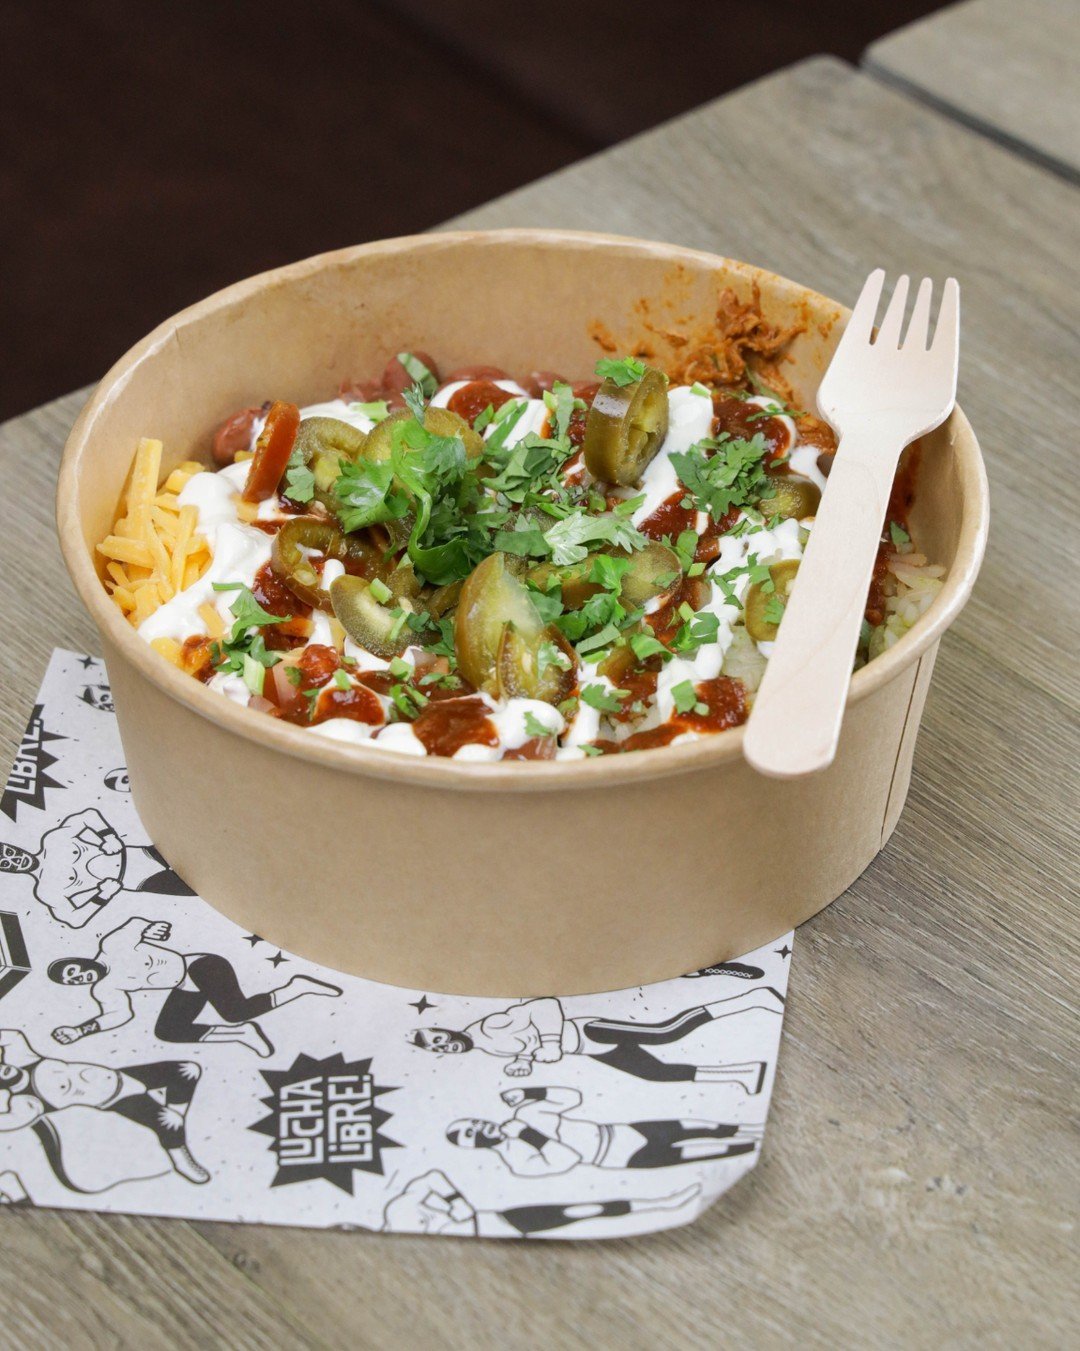 Take your lunch times to the next level with a delicious burrito bowl. Make sure you get it with all your favourite toppings.

#fullyloaded #nachos #jalapeno #cheesesauce #guacamole #sourcream #eat17bishopsstortford #tacos #mecicanstreetfood #mexican